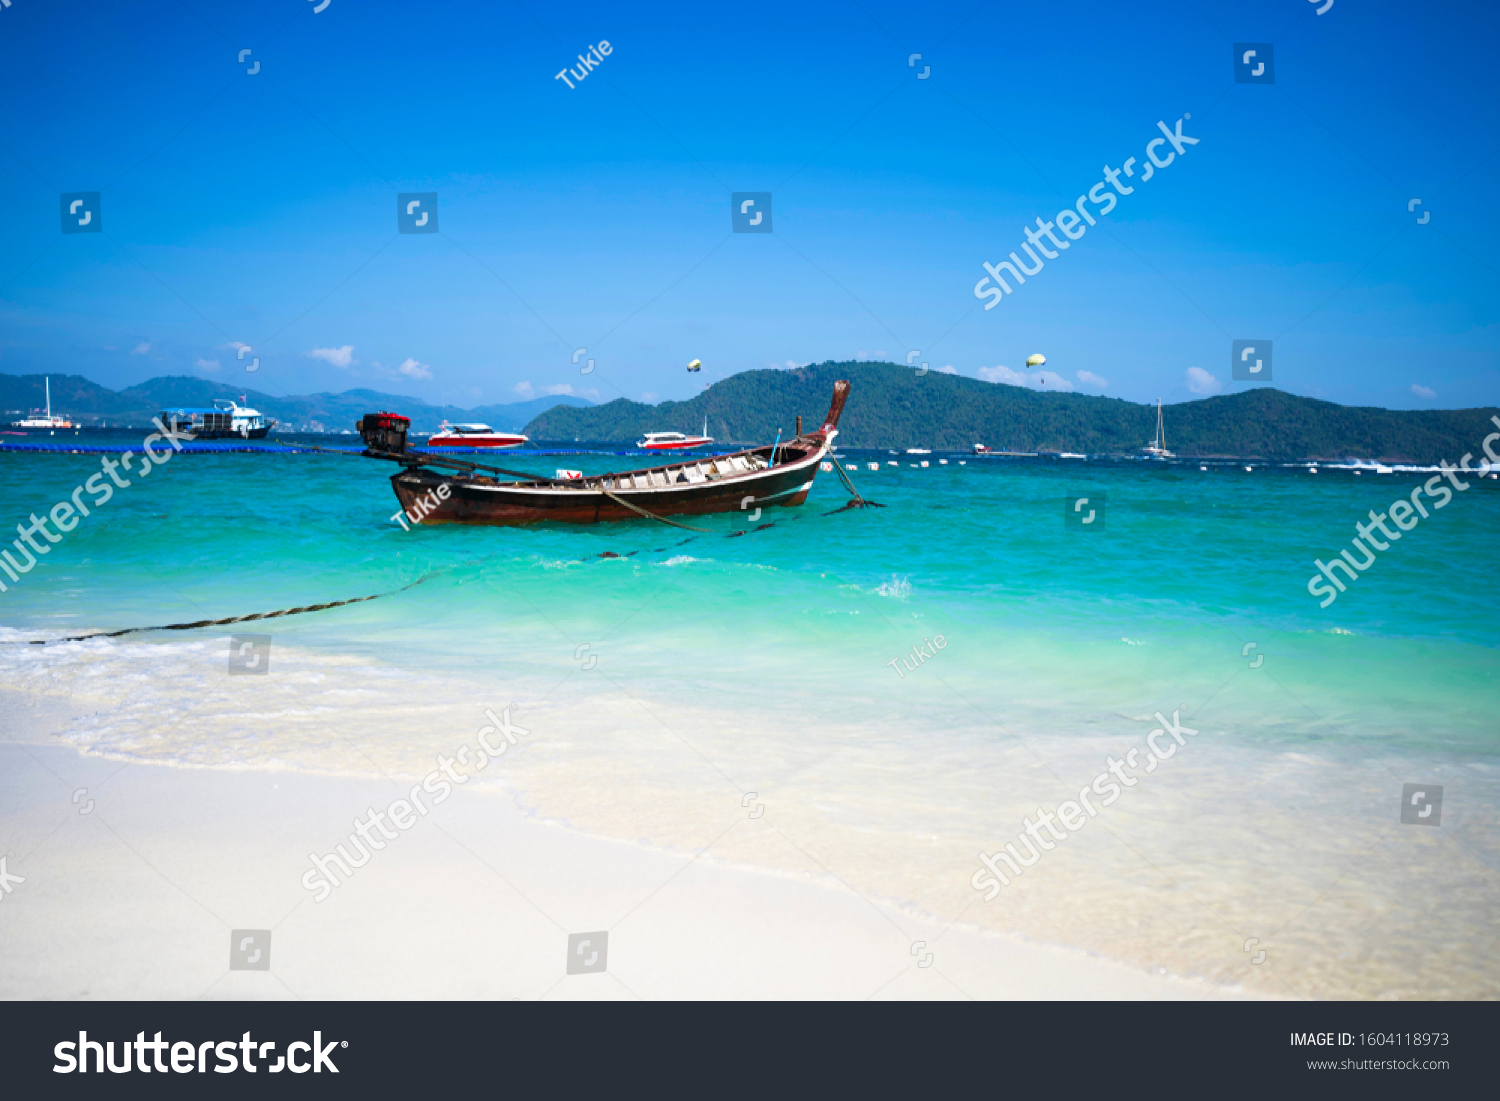 Fishing boat in the blue sea and white sand beach. #1604118973